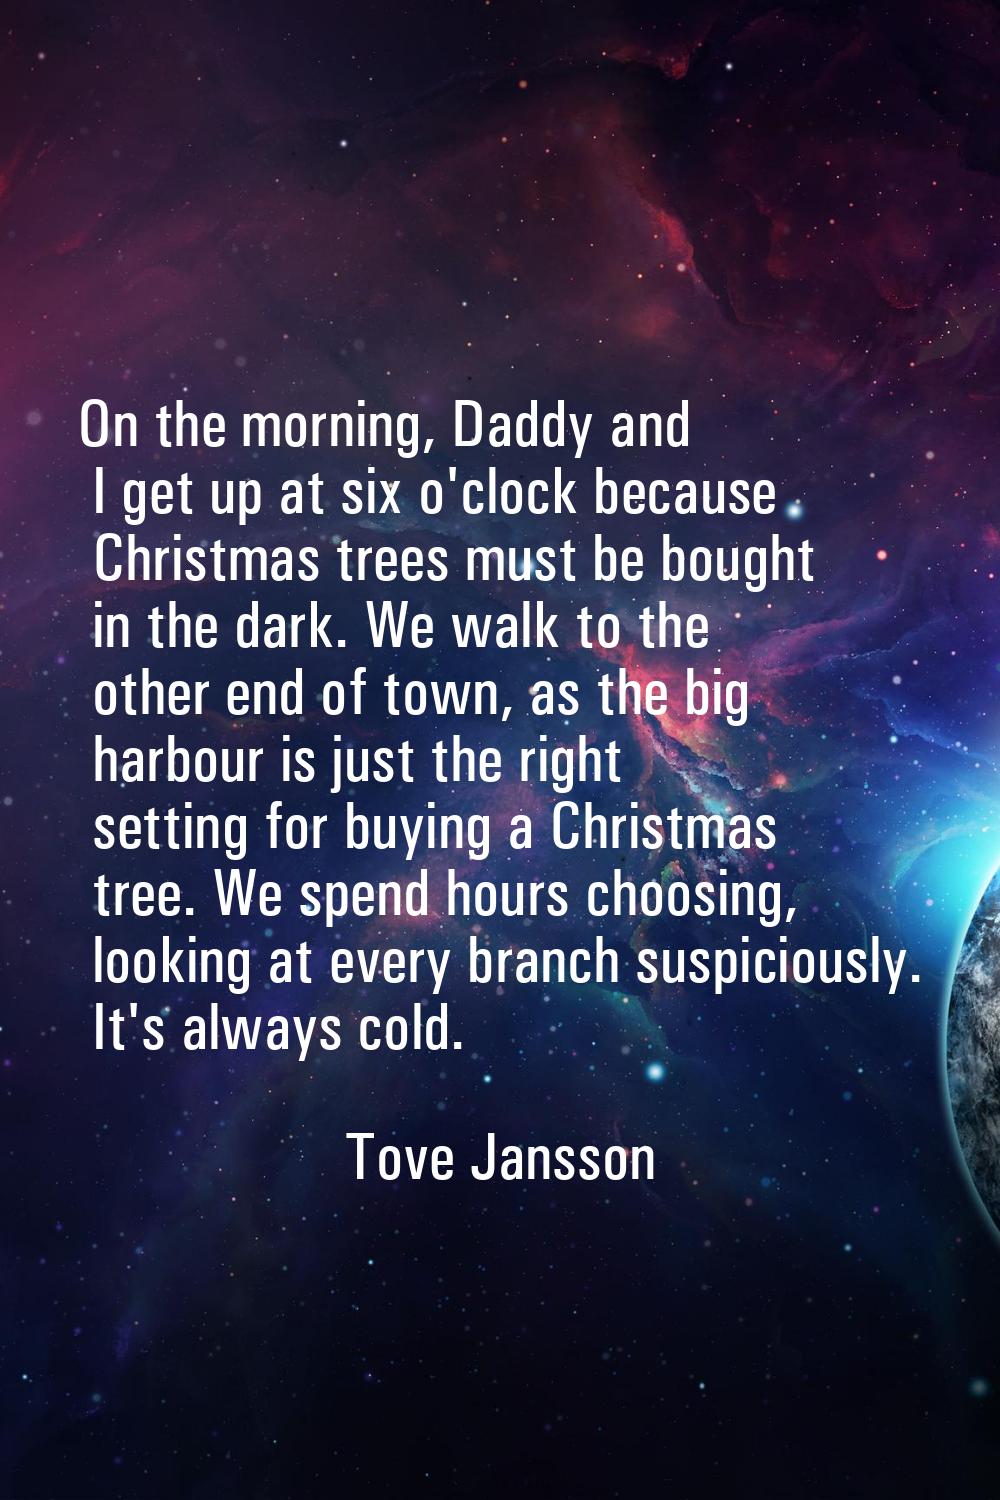 On the morning, Daddy and I get up at six o'clock because Christmas trees must be bought in the dar